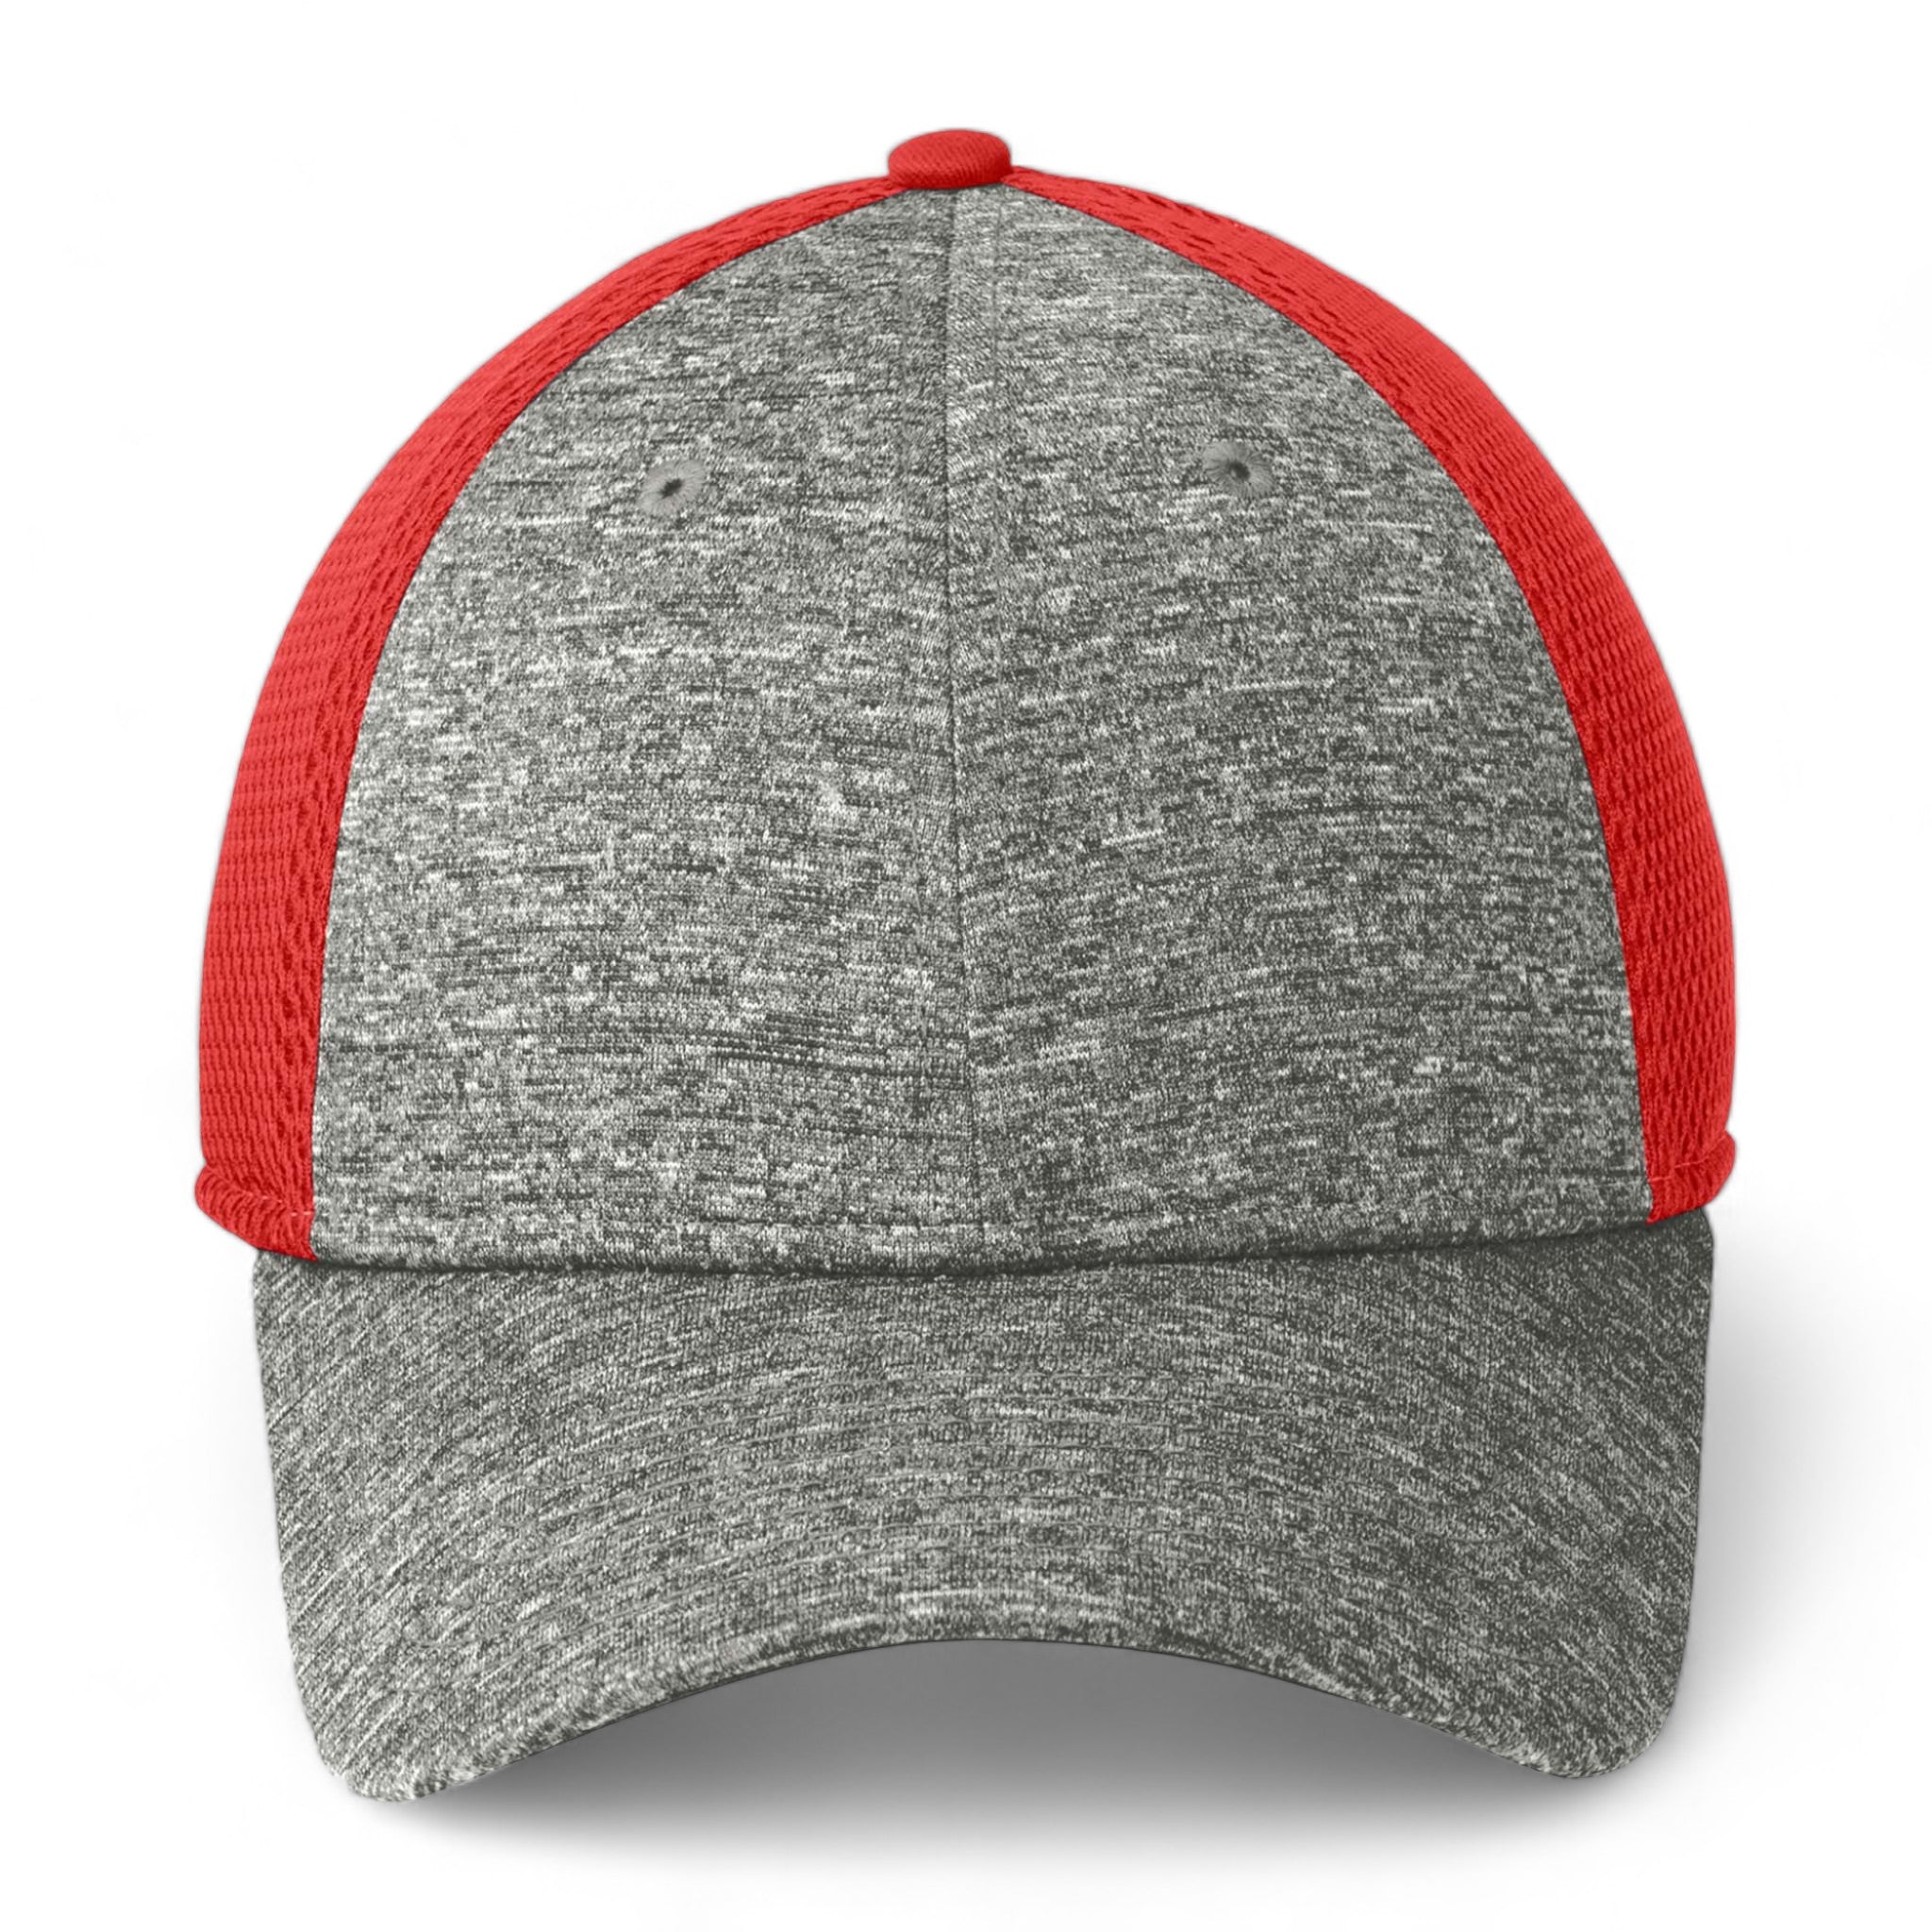 Front view of New Era NE702 custom hat in scarlet red and shadow heather